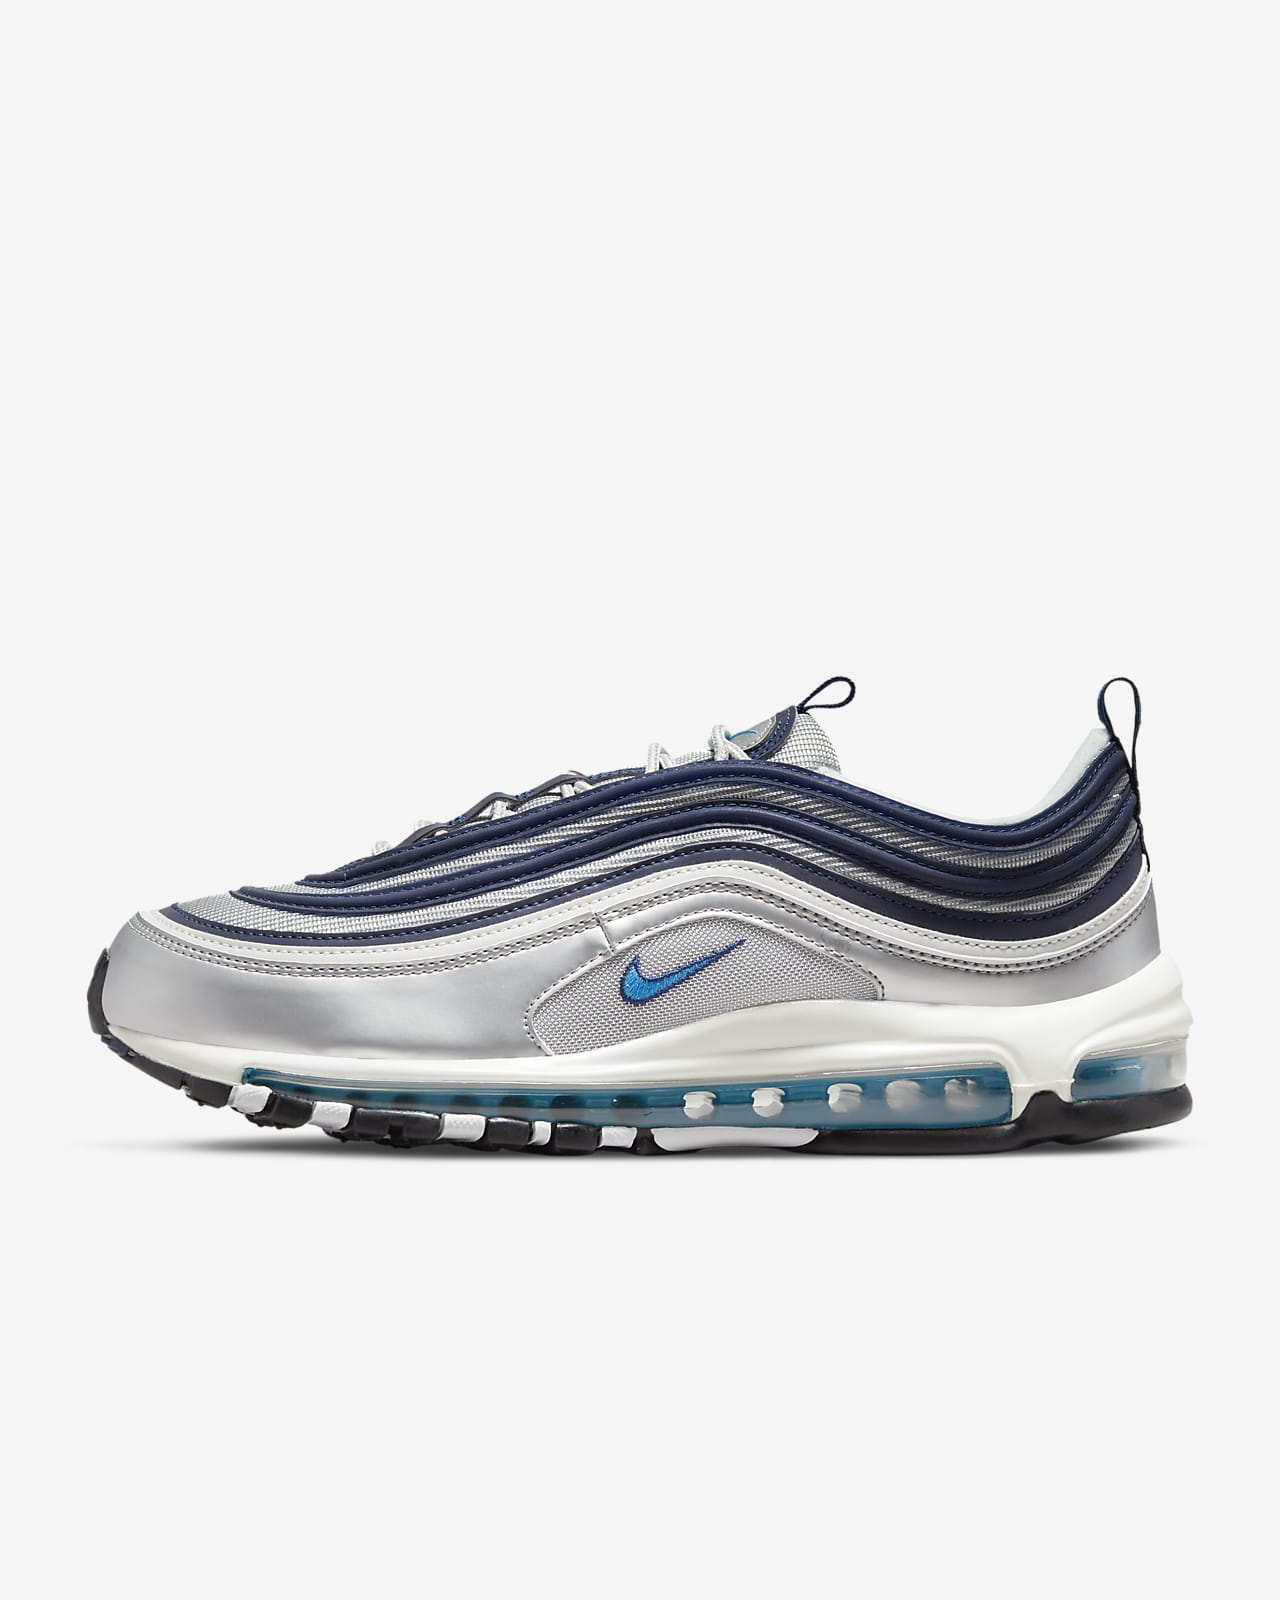 analog delicacy Pearly Nike Air Max 97 OG Men's Shoes. Nike.com